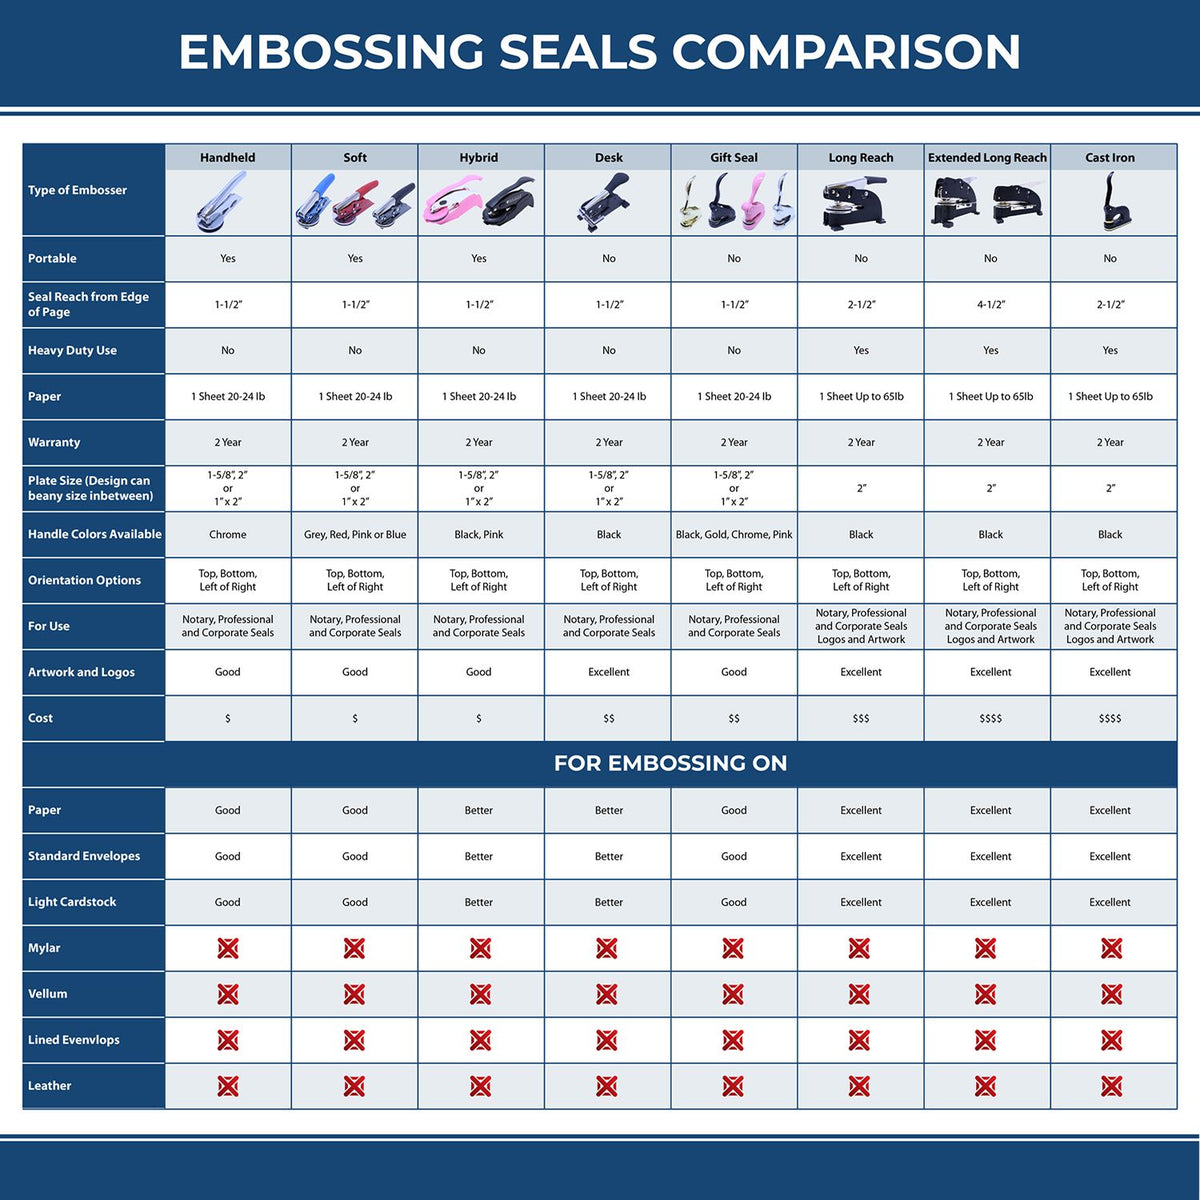 A comparison chart for the different types of mount models available for the Handheld Oklahoma Professional Engineer Embosser.